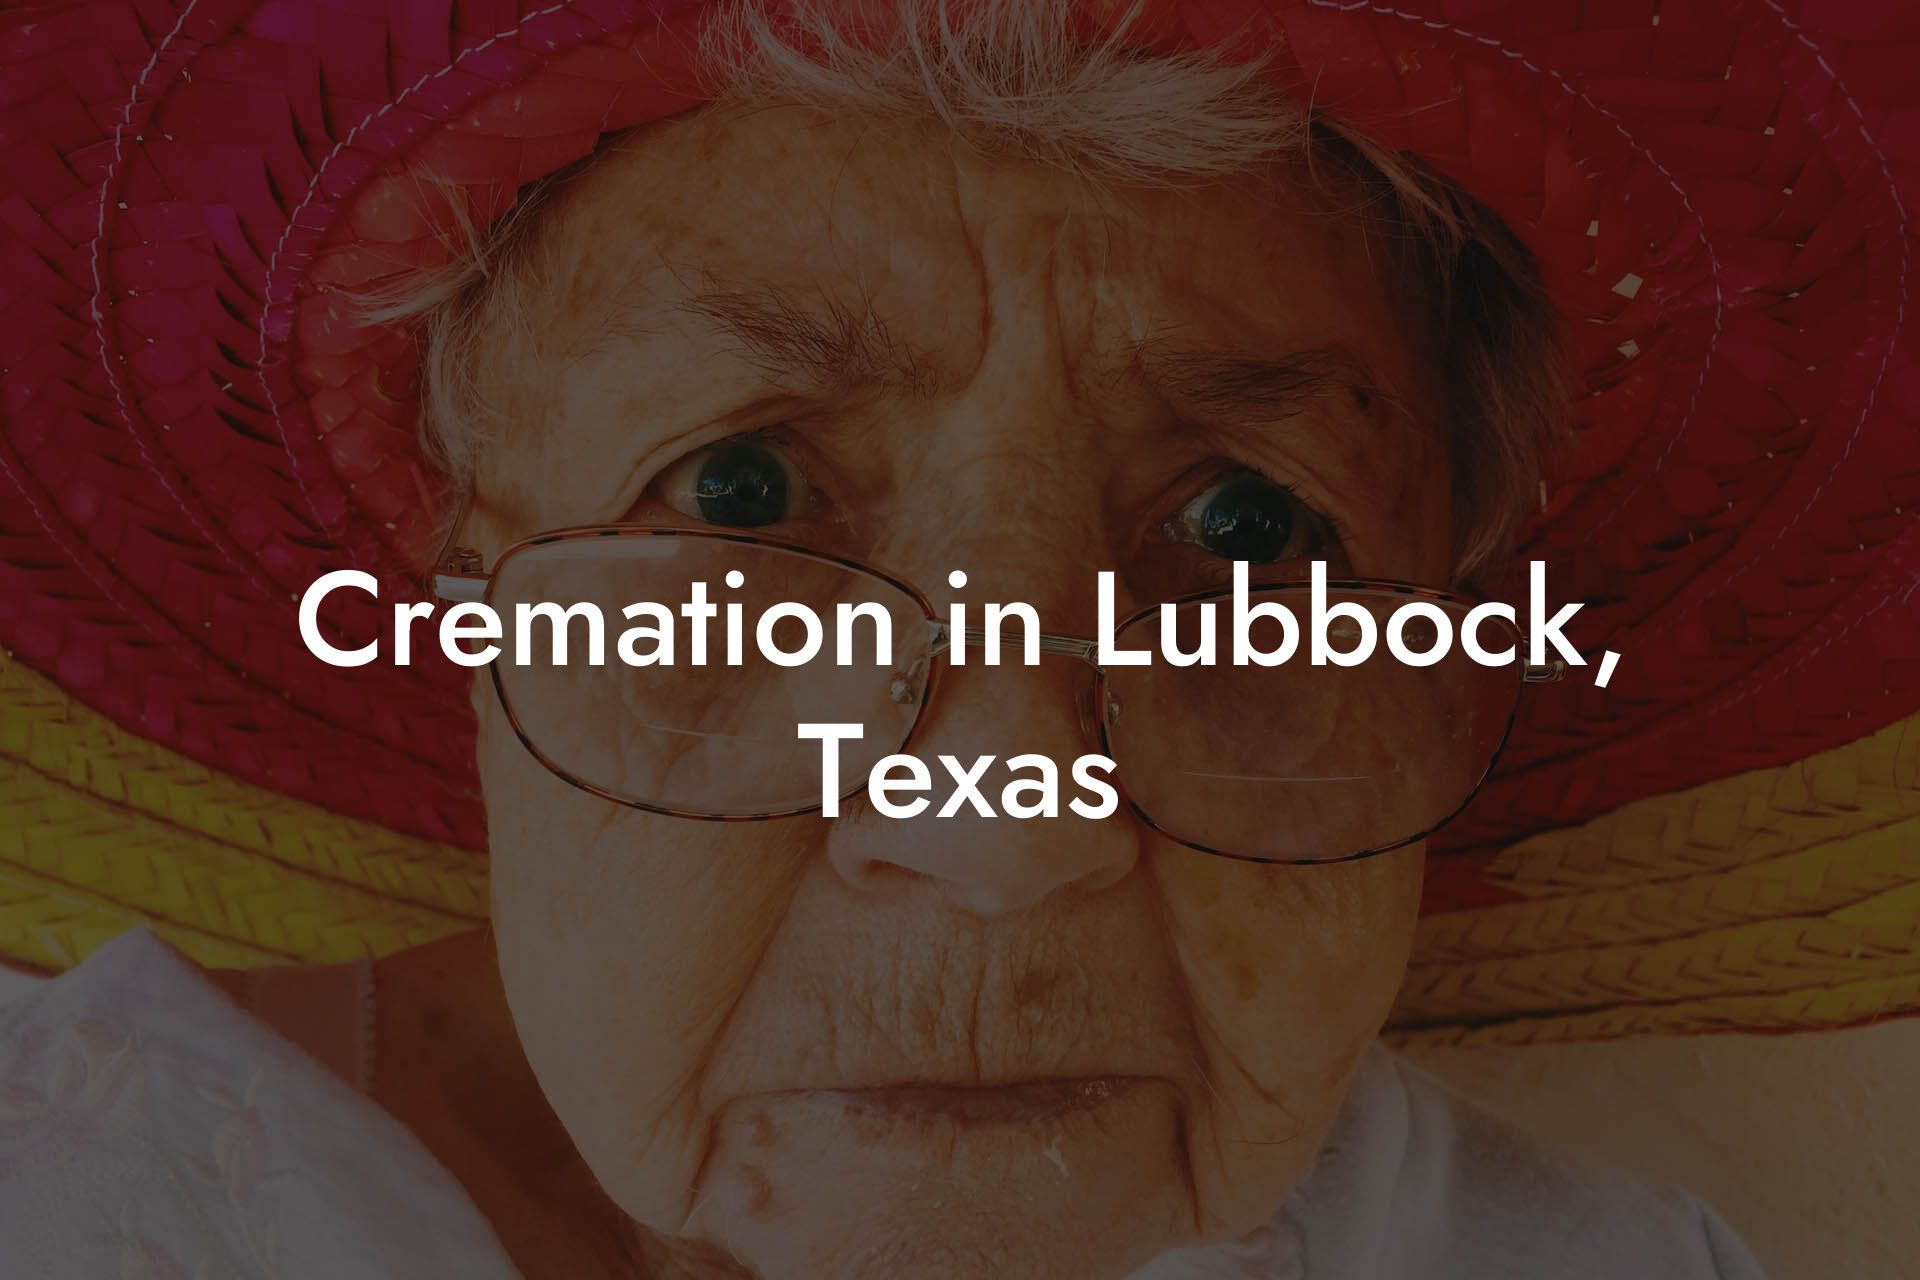 Cremation in Lubbock, Texas